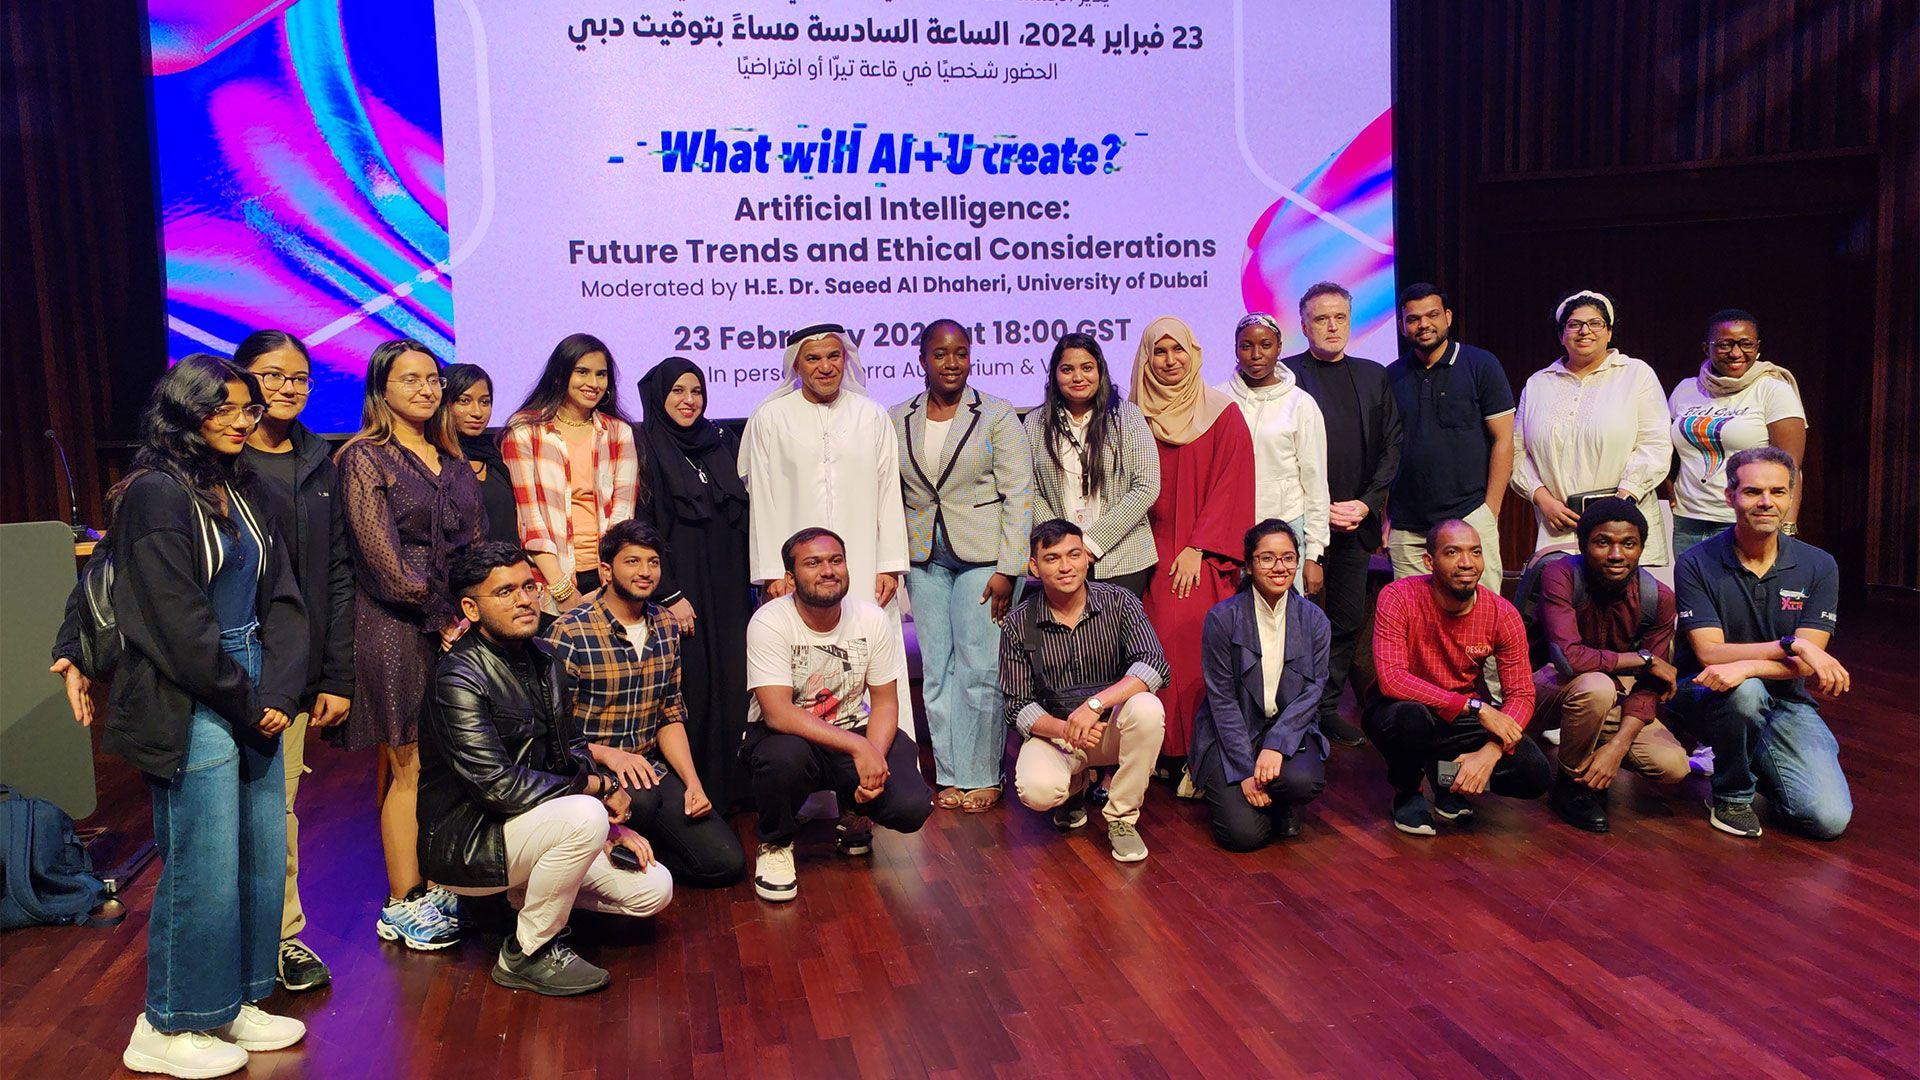 The month of February kicked off with an immersive field trip to enrich the student experience at the AI Film Festival at Expo City Dubai